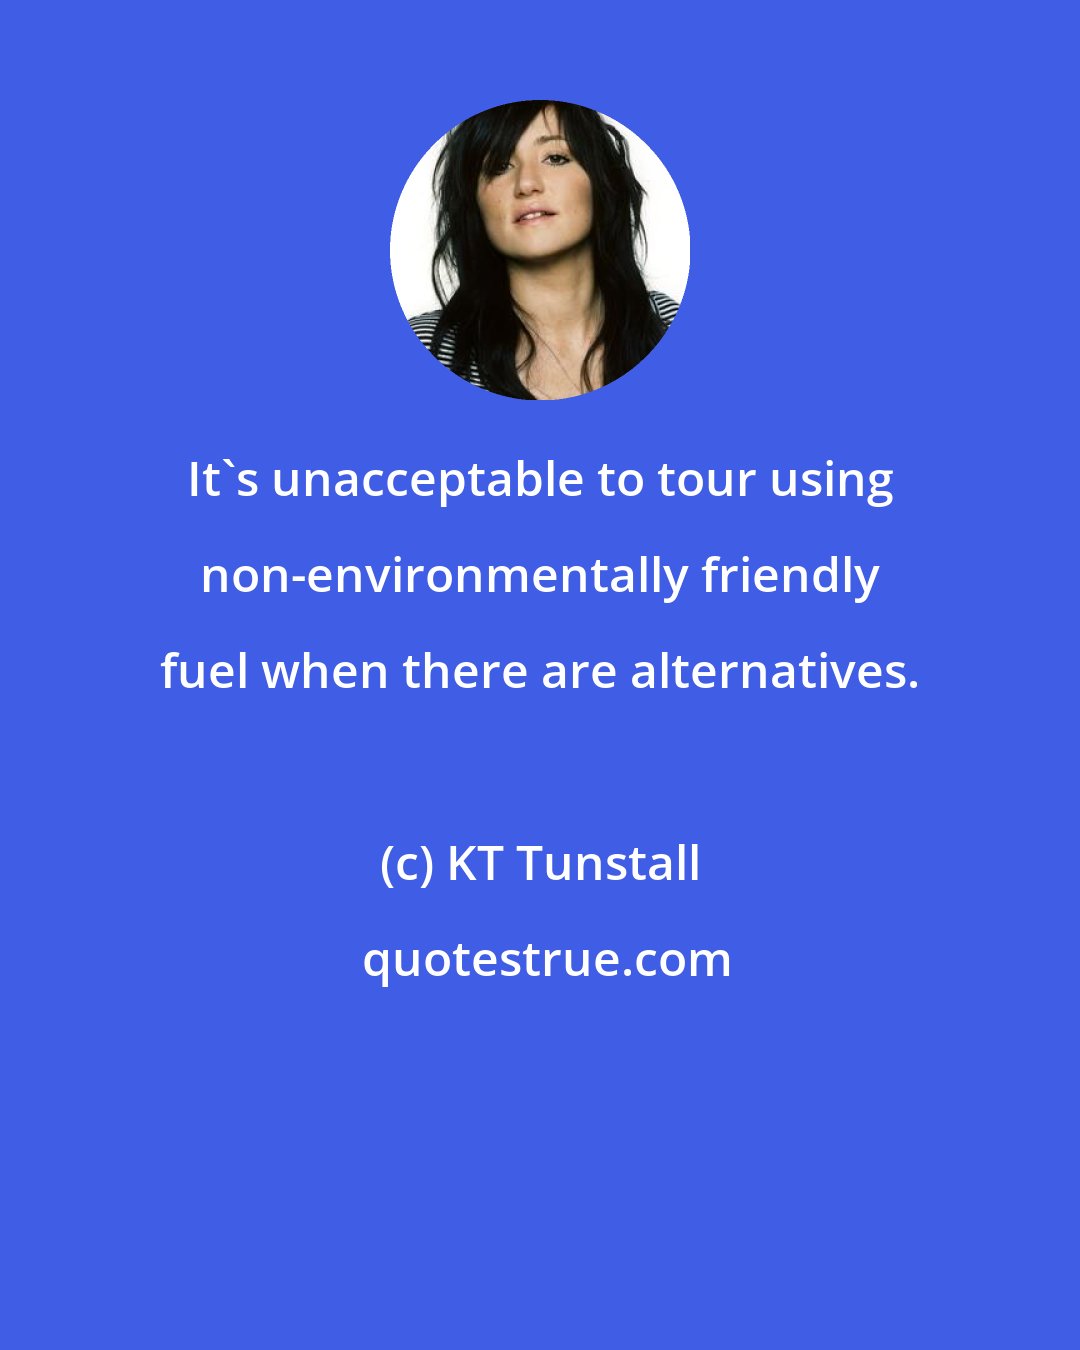 KT Tunstall: It's unacceptable to tour using non-environmentally friendly fuel when there are alternatives.